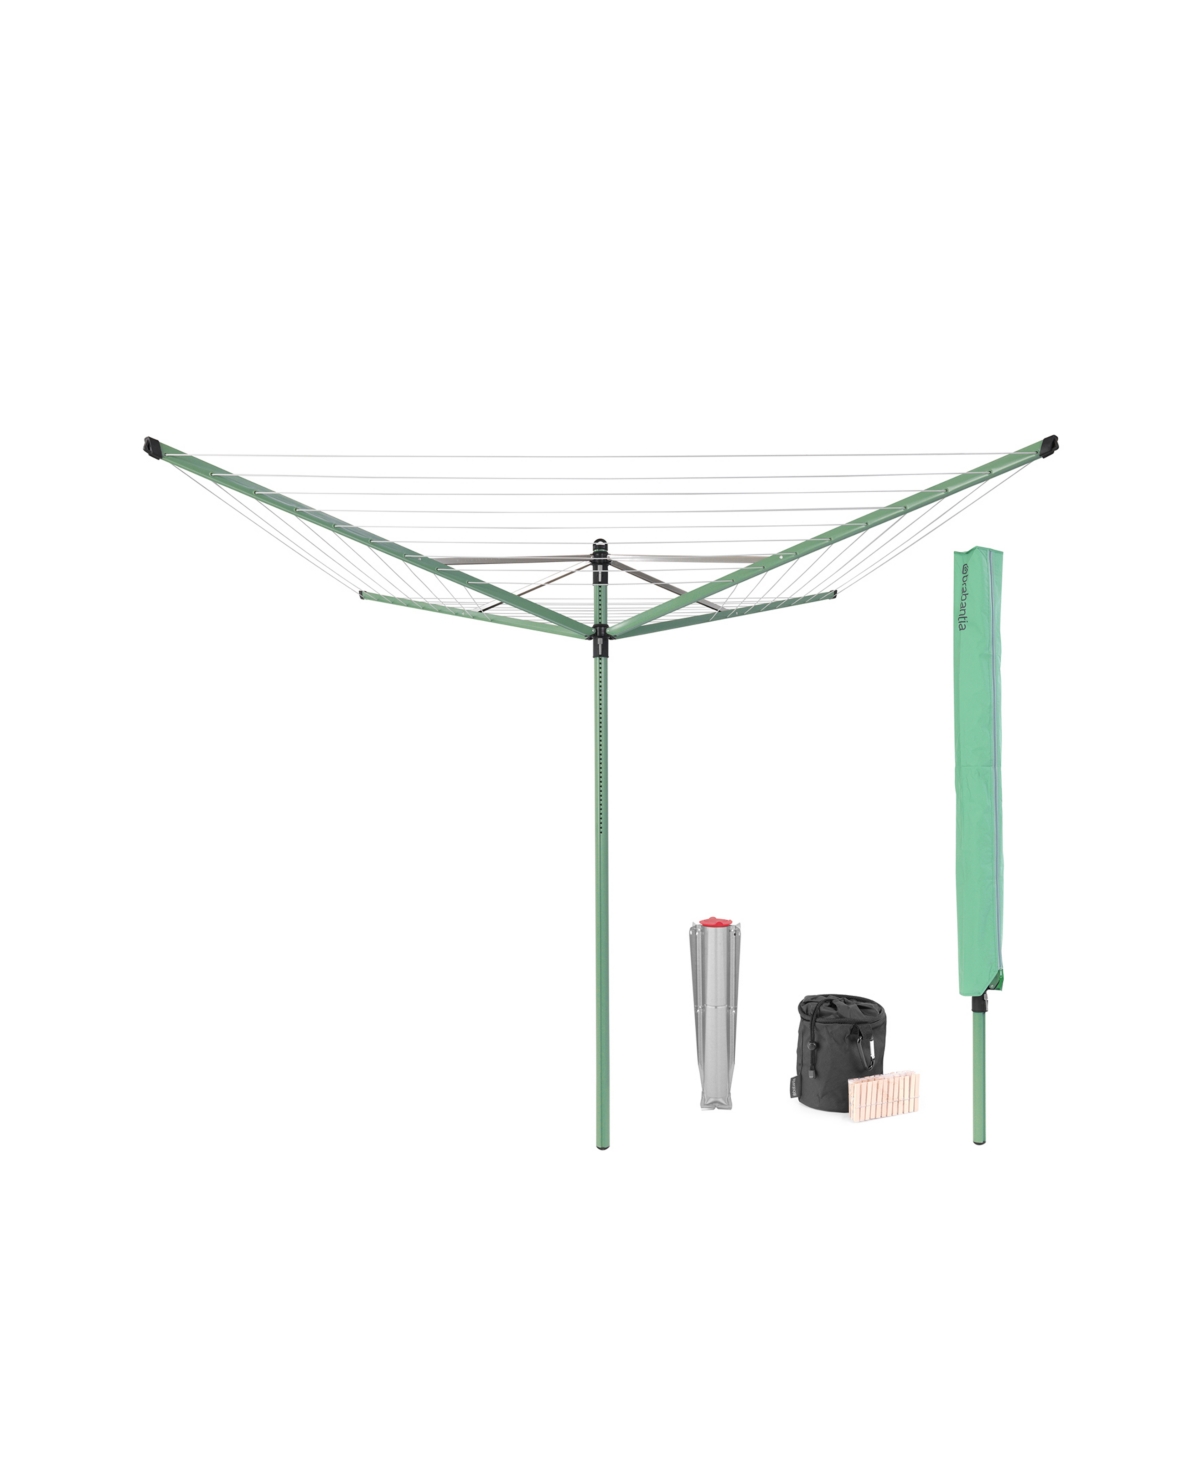 Rotary Lift-o-Matic Clothesline - 164', 50 Meter with Metal Ground Spike, Protective Cover, Peg Bag and Wooden Clothespins Set - Leaf Green